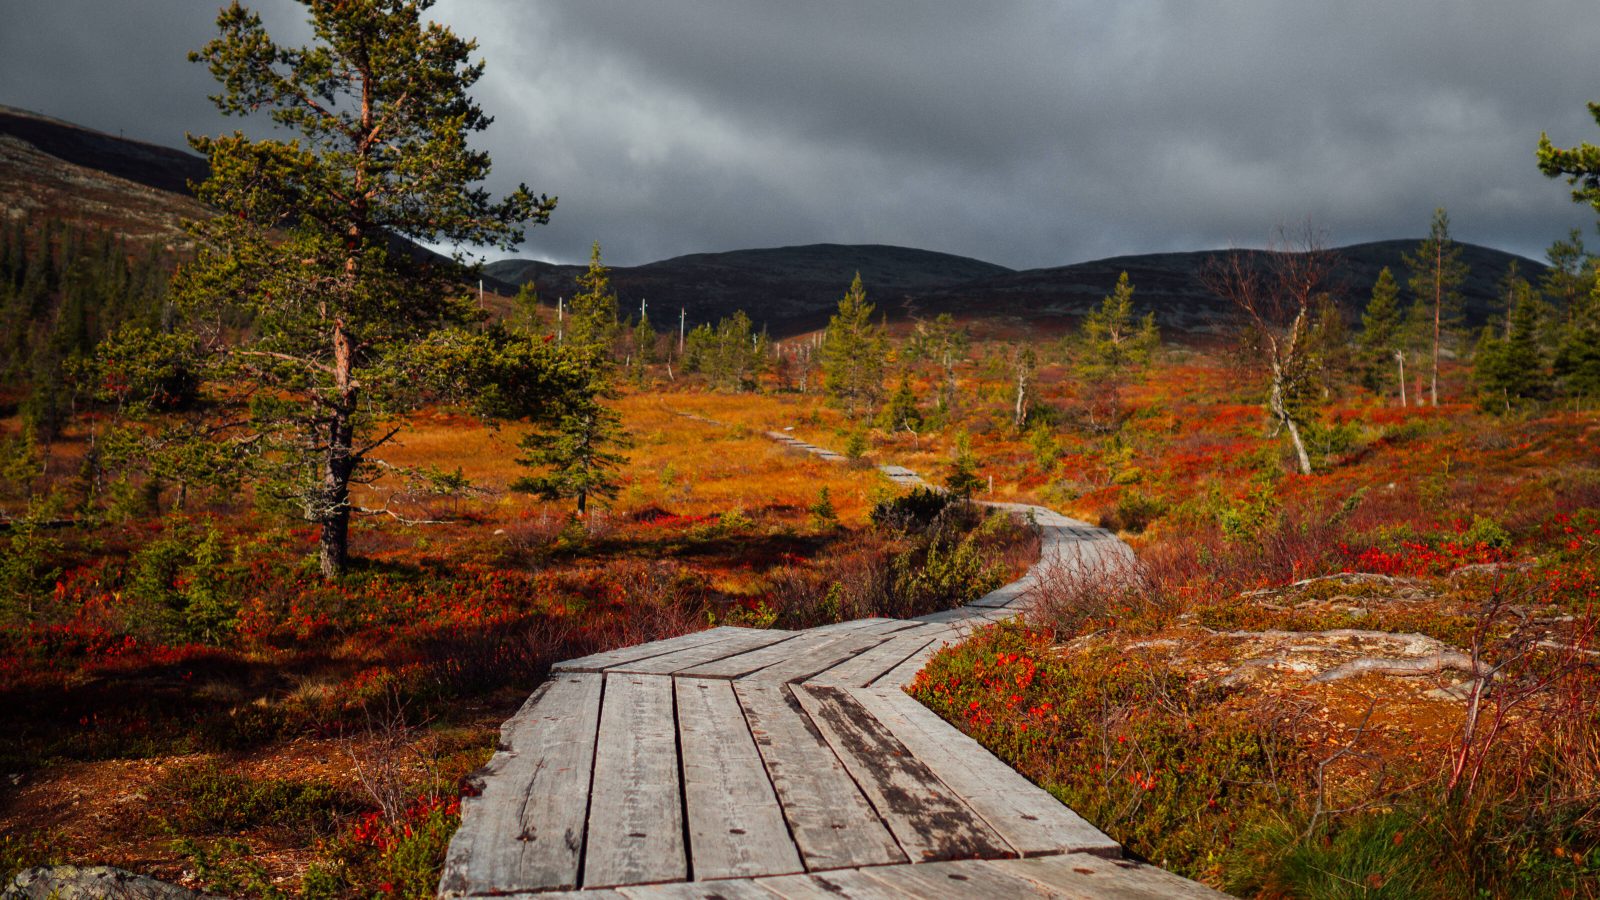 A wooden walkway snakes through the colourful Finnish marshland.